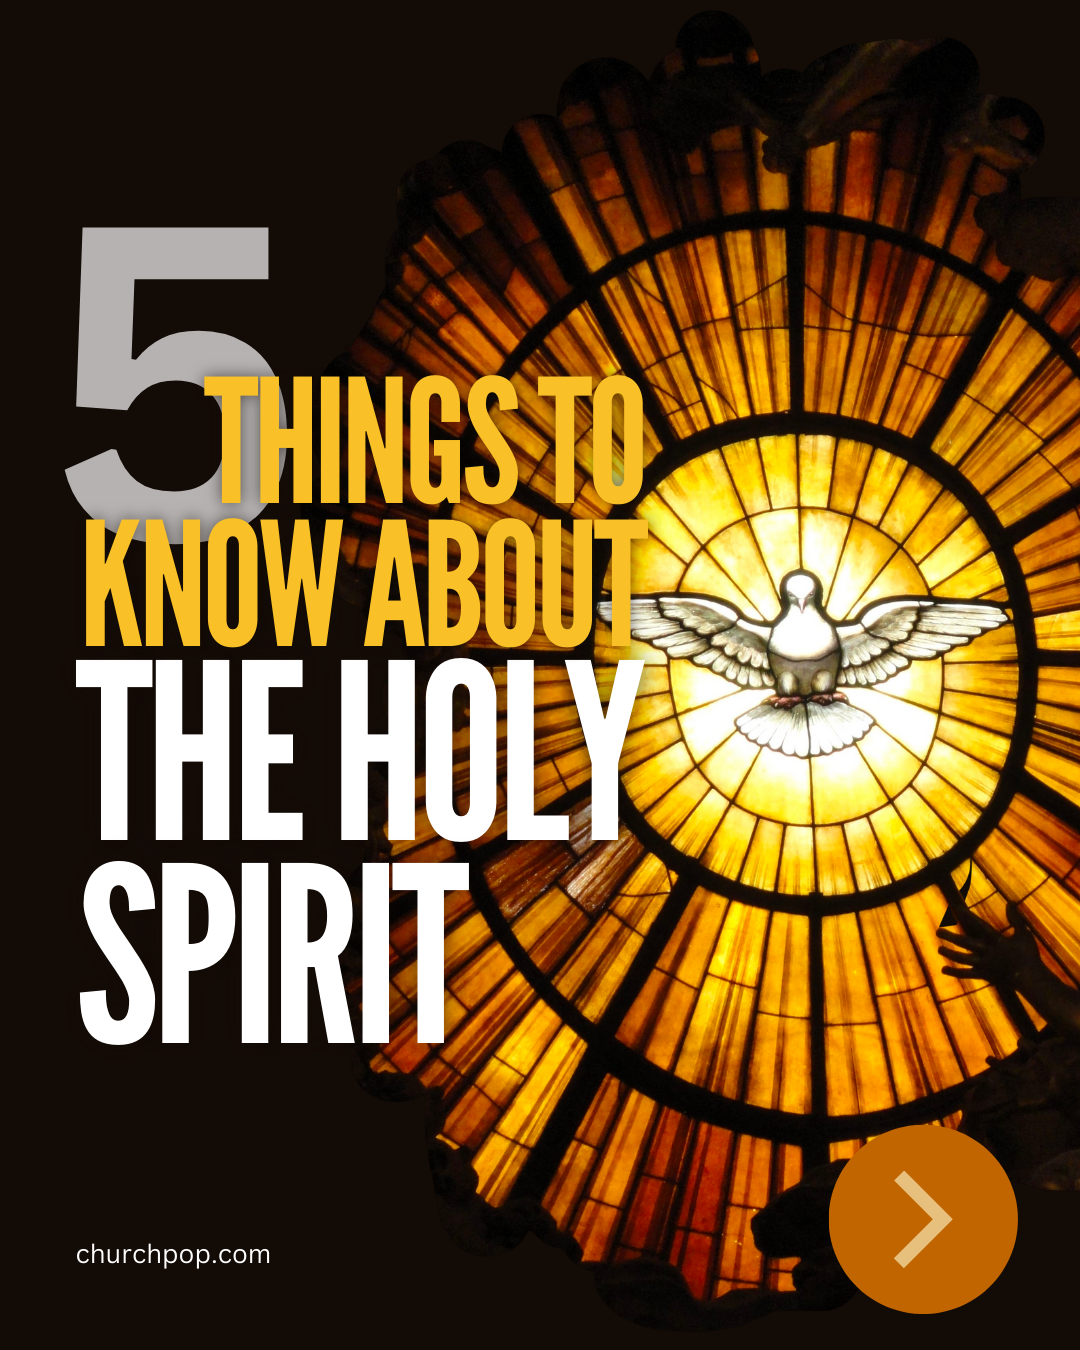 5 Things All Catholics Should Know About The Holy Spirit on Pentecost Sunday